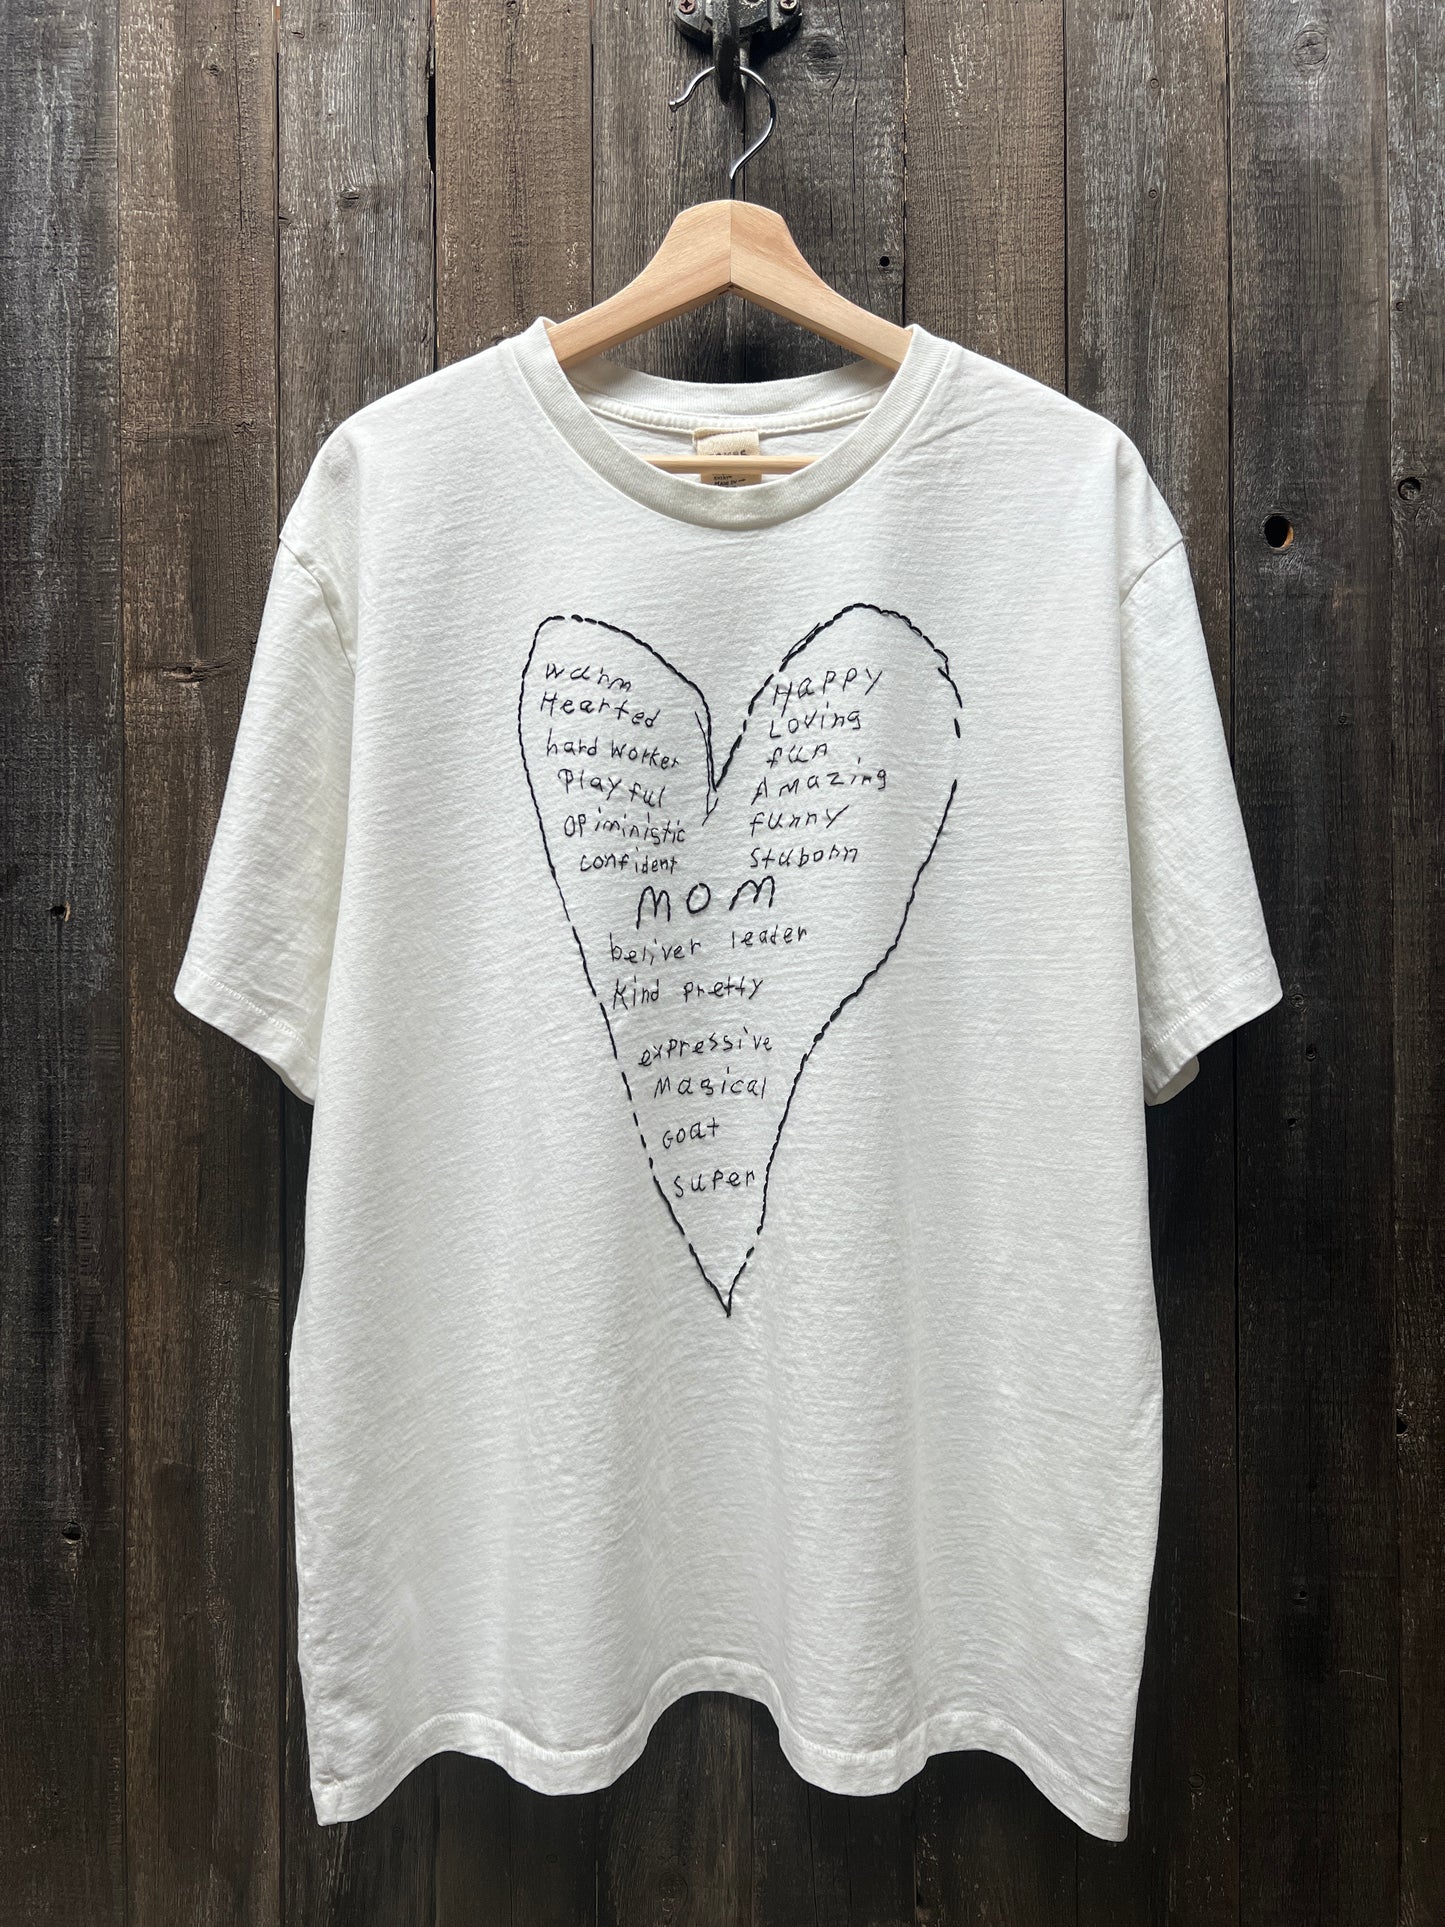 Translate Your Design into Embroidery Unisex Tshirt (Custom Hand Embroidery Letter Size 8.5 X11)